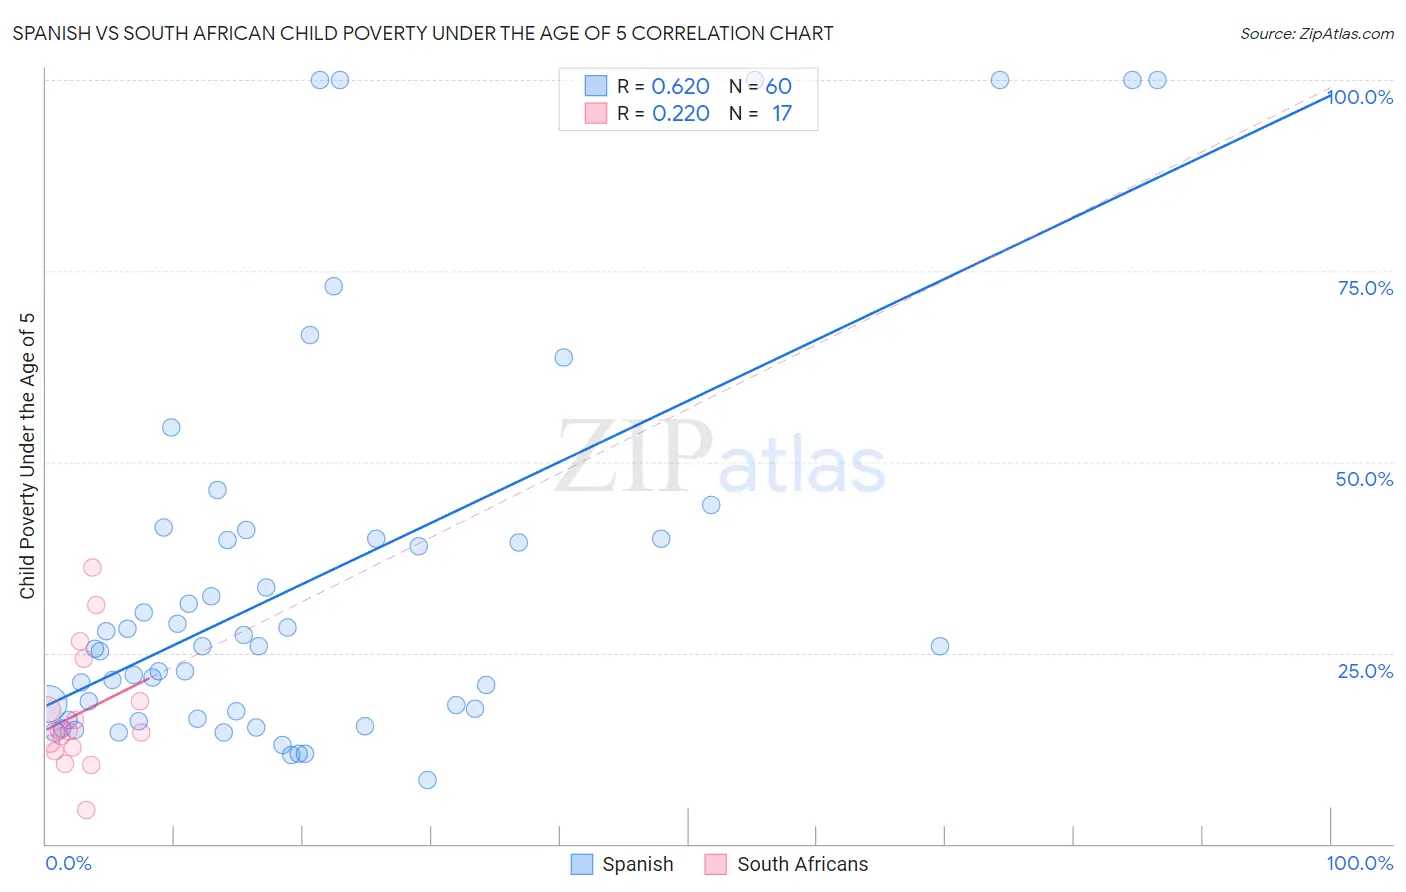 Spanish vs South African Child Poverty Under the Age of 5